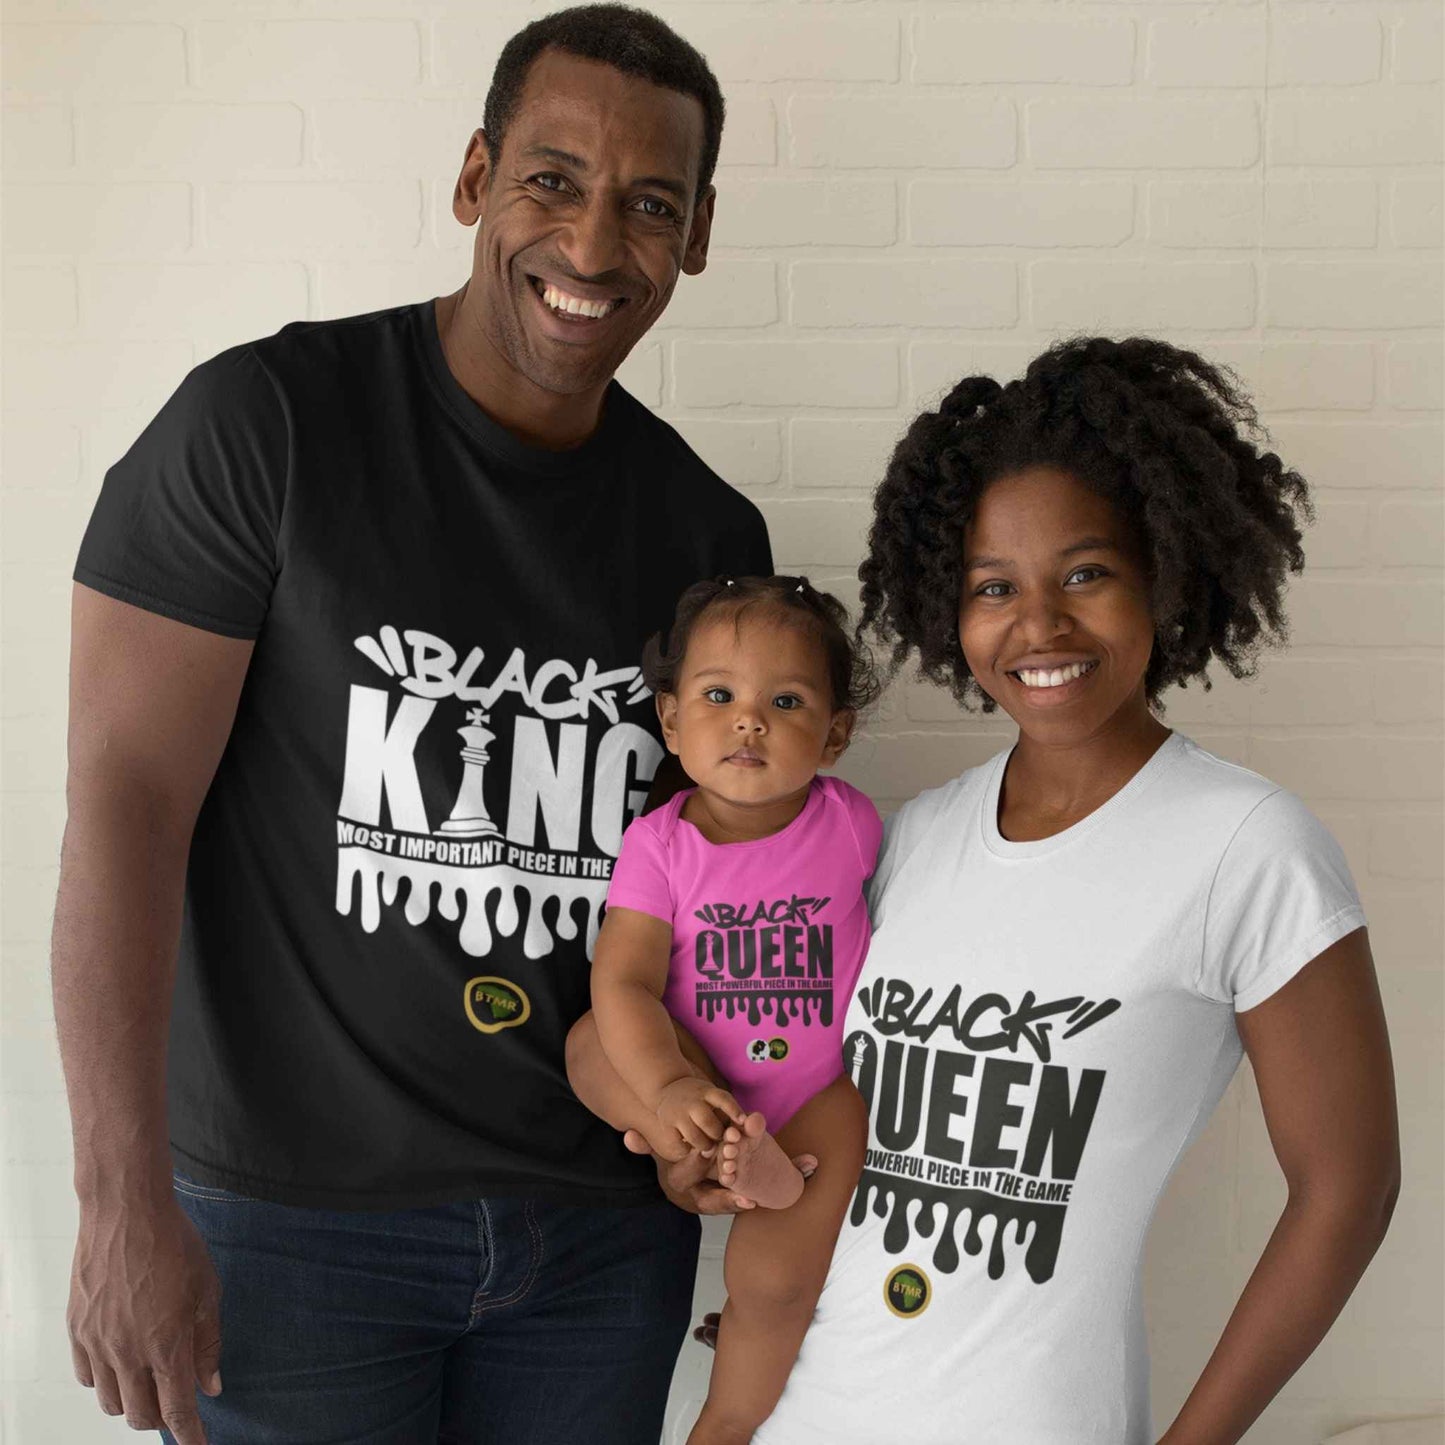 Picture shows a black family, mum, dad and baby wearing their black king and black queen chess statement t shirts. Black woman has on a white fitted t shirt, short sleeves, with Black Queen in black font on the front. She's holding a baby who is wearing a black queen babygrow, they are with the dad who wears a black t shirt, which says Black King the most powerful piece on the board.